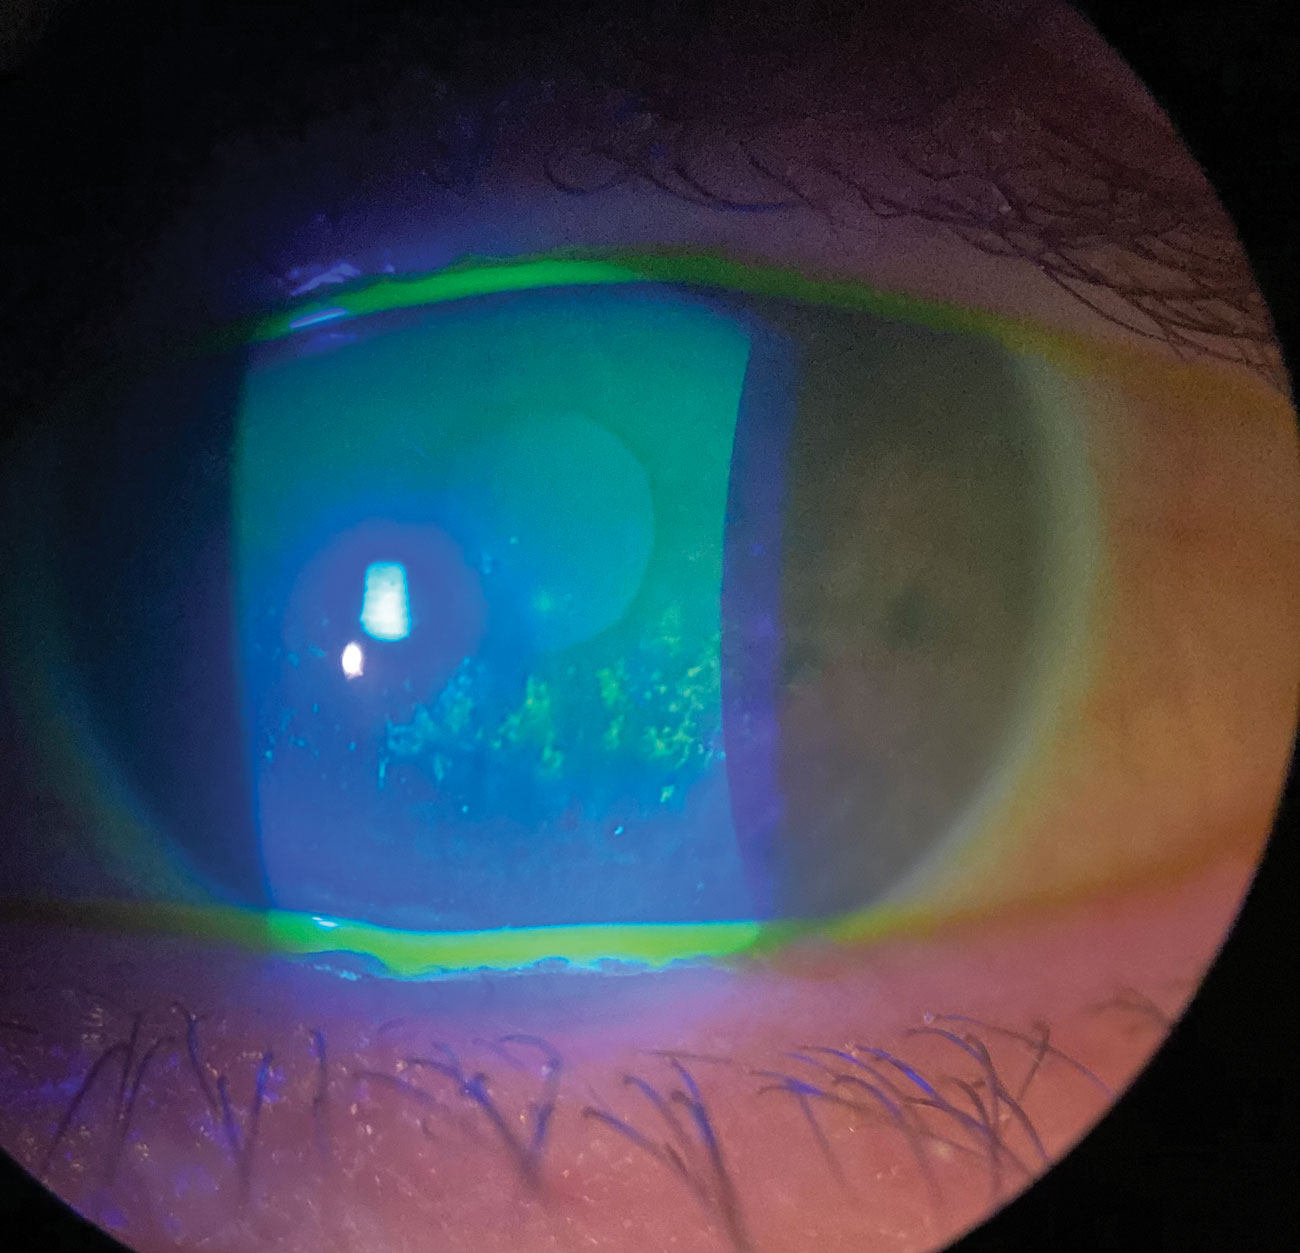 A 2+ band of corneal punctate epithelial erosion in a patient with severe keratoconjunctivitis sicca.